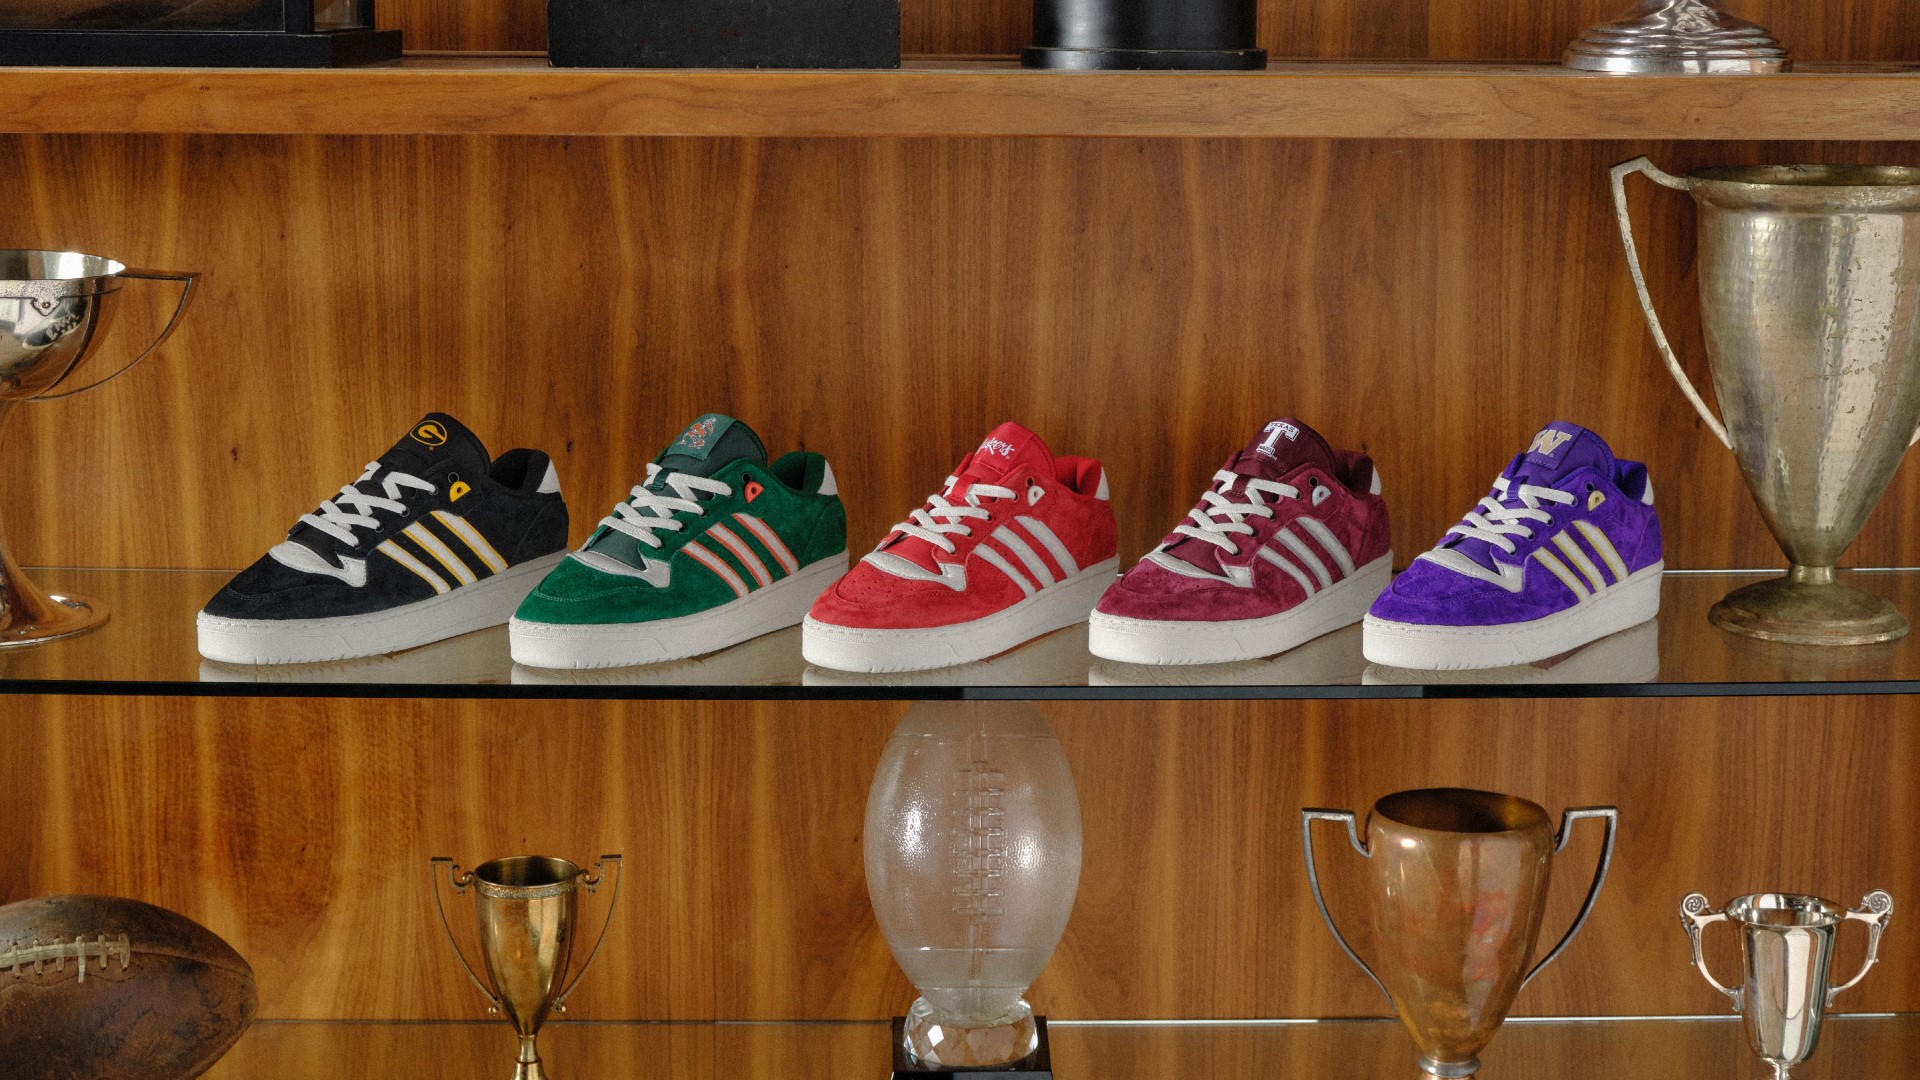 adidas Originals Steps into the Collegiate Space with First-Ever Customized Footwear Collection